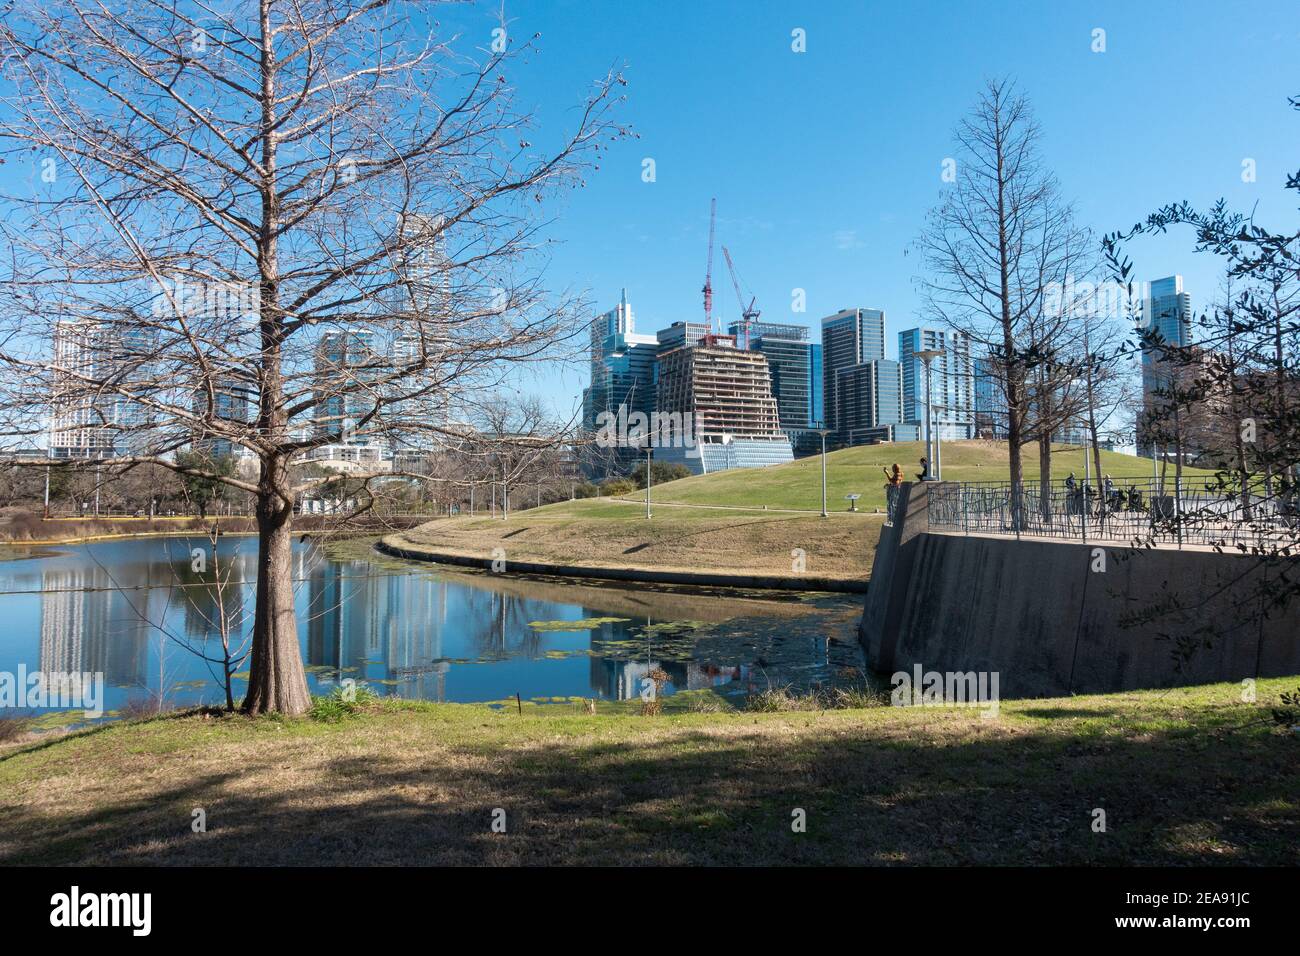 Downtown Austin Texas skyline with pond reflections at Butler Metro Park Stock Photo